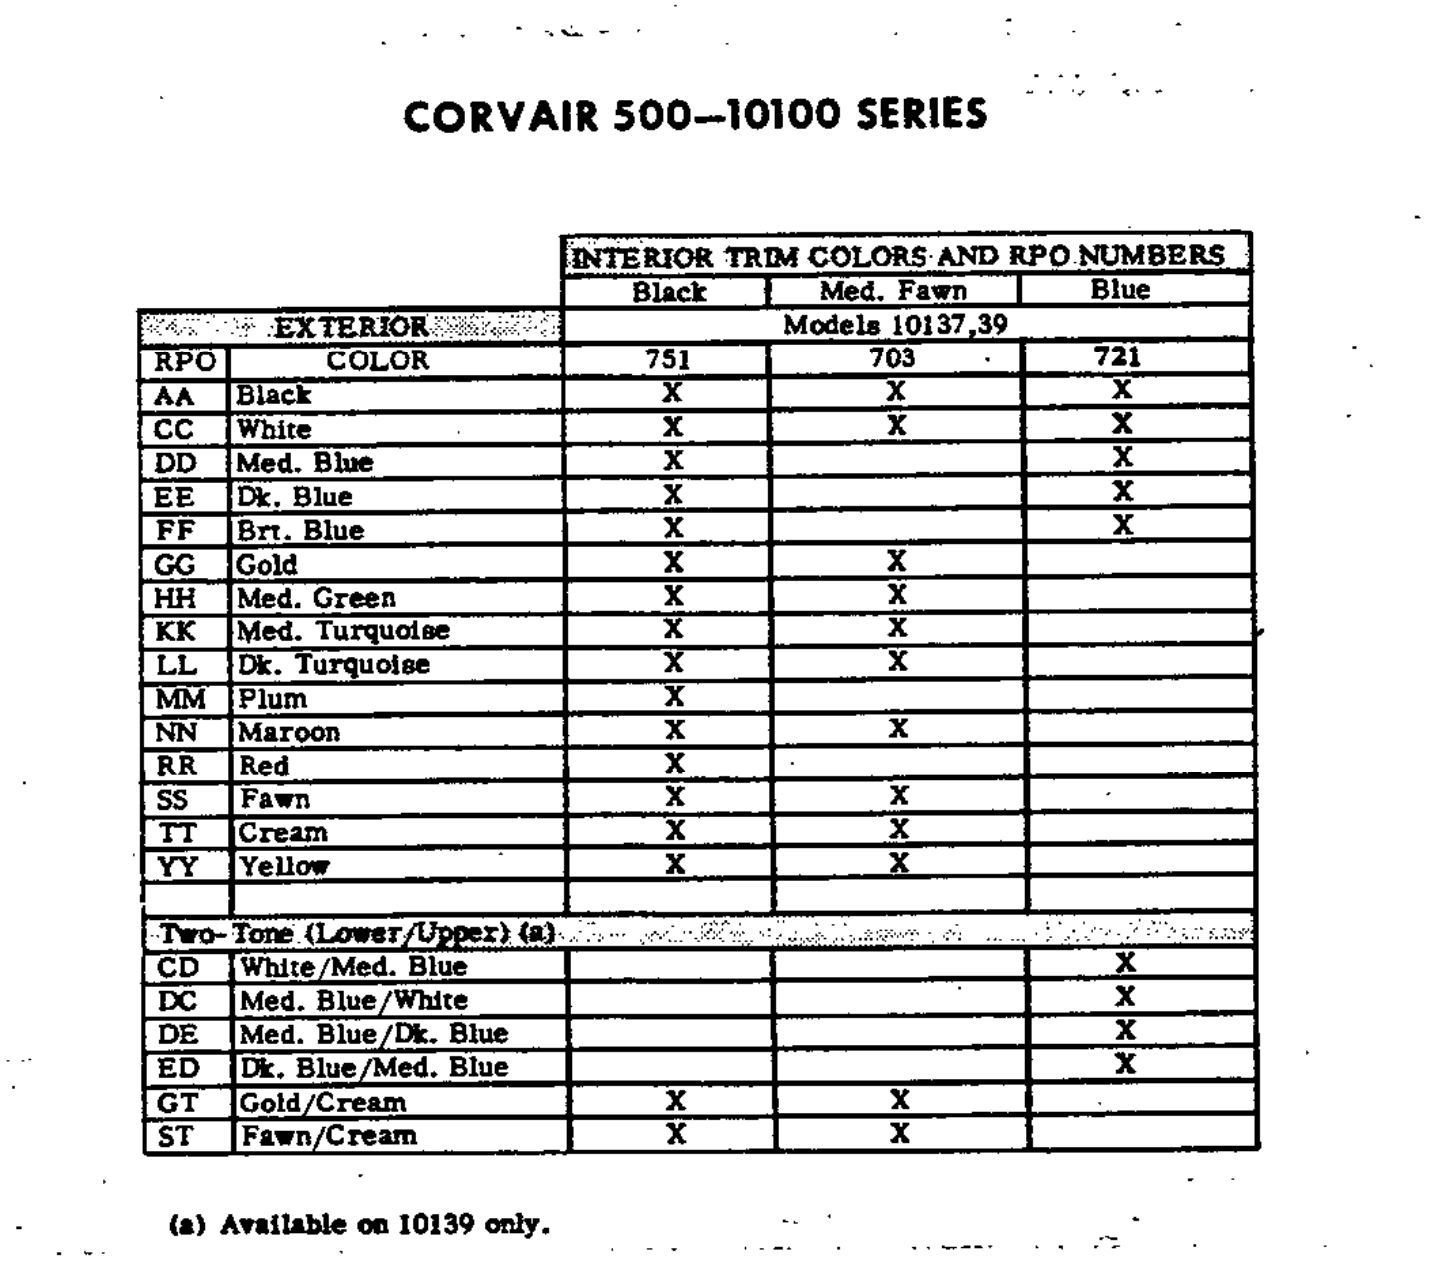 Paint Codes for Corvair 500